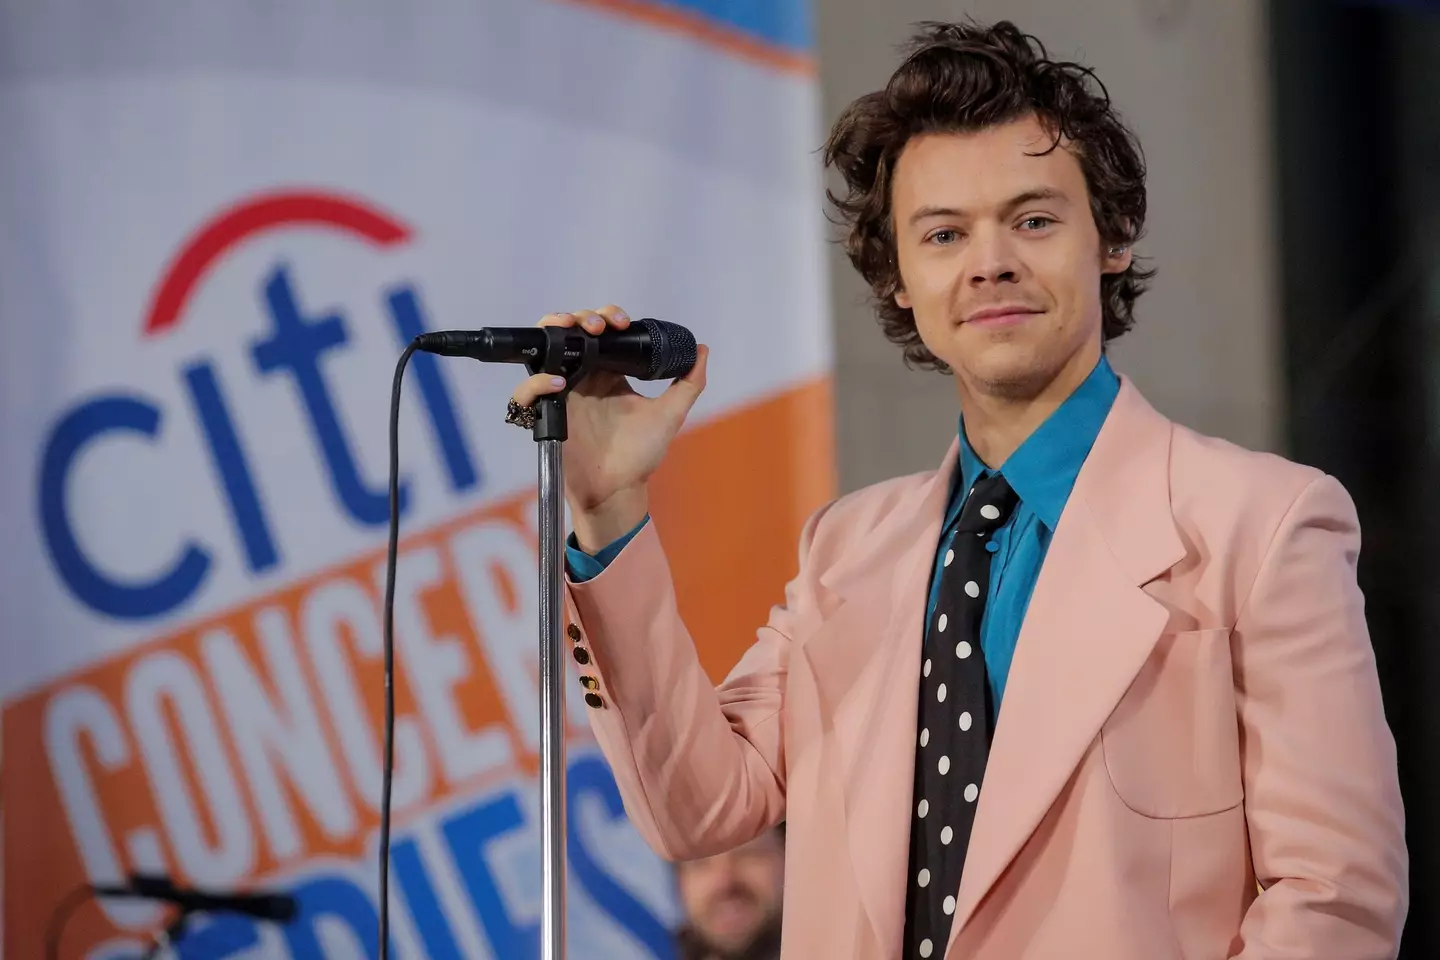 Harry Styles said labelling his sexuality was outdated.